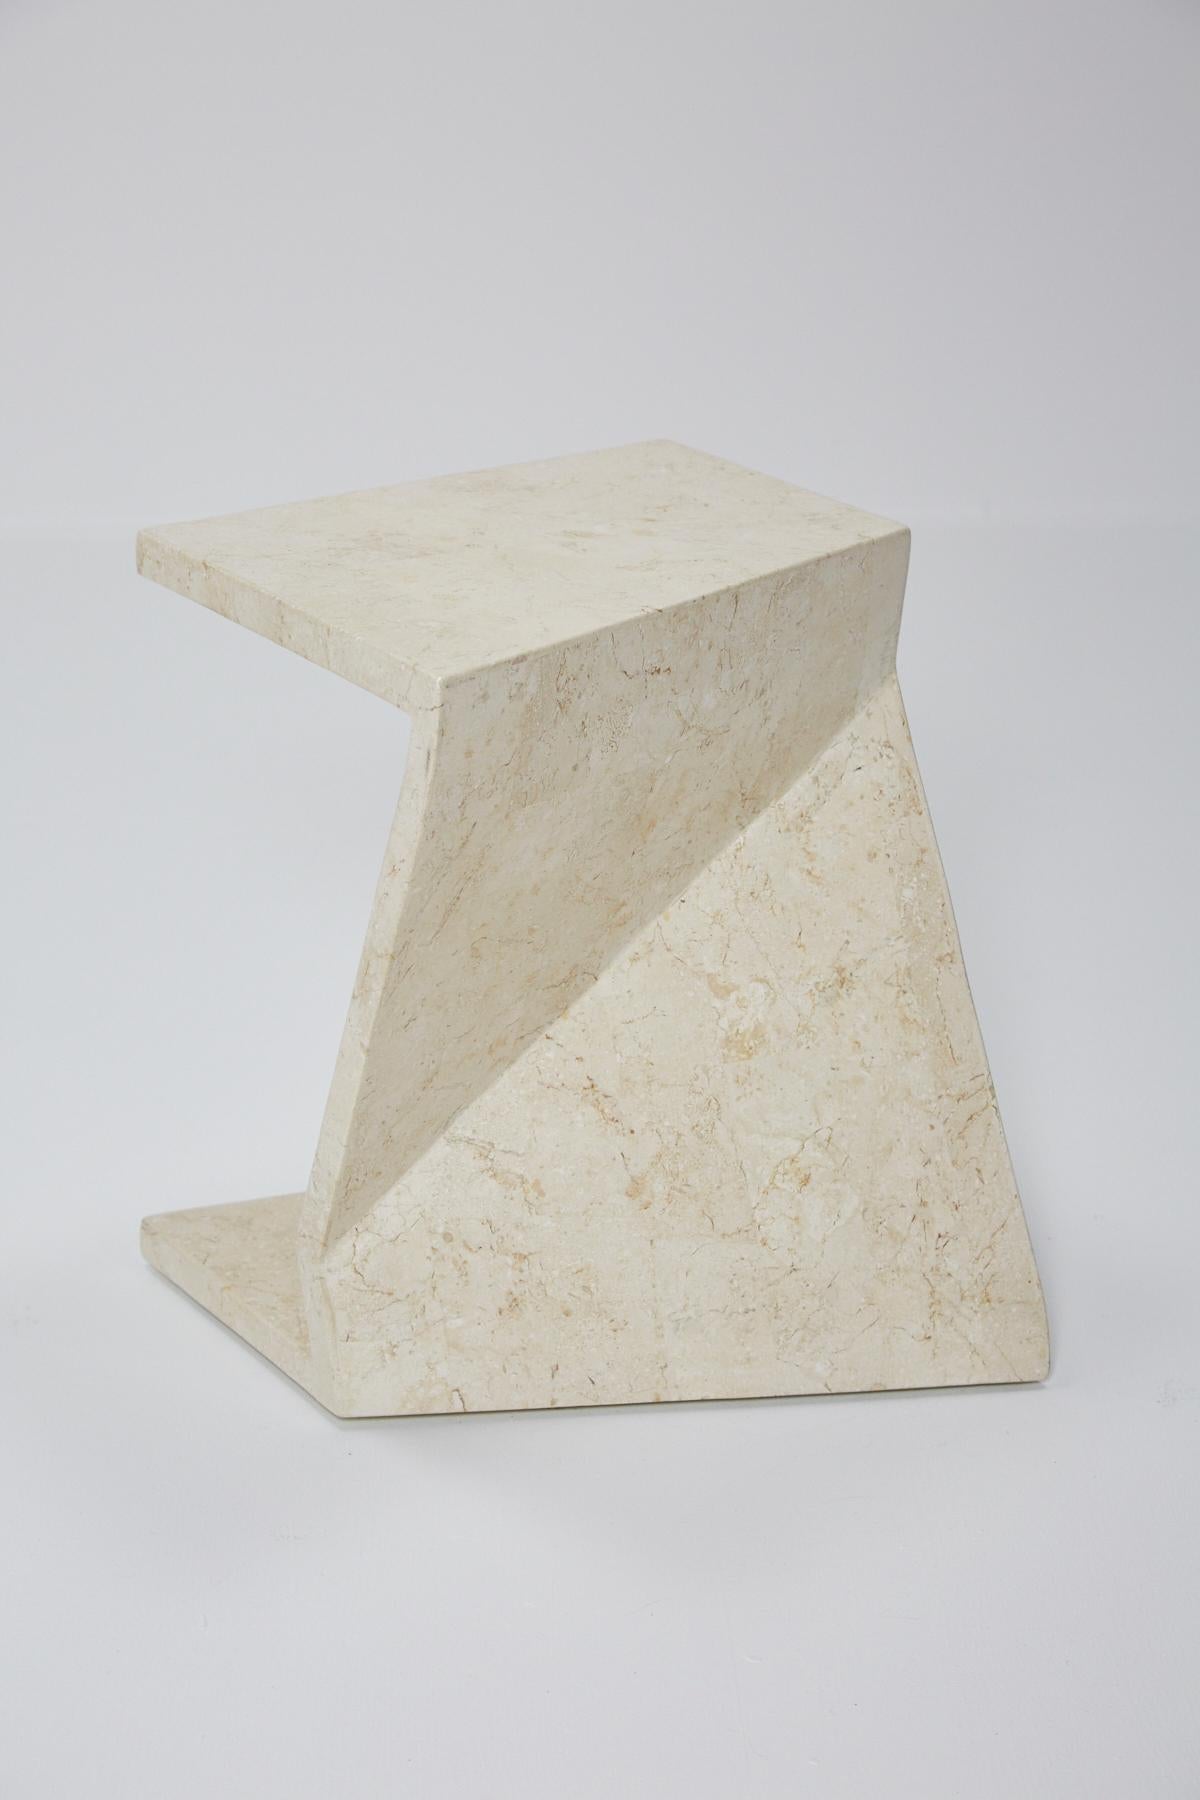 Philippine Zig Zag Side Tables or Coffee Table in Tessellated White Stone, 1990s